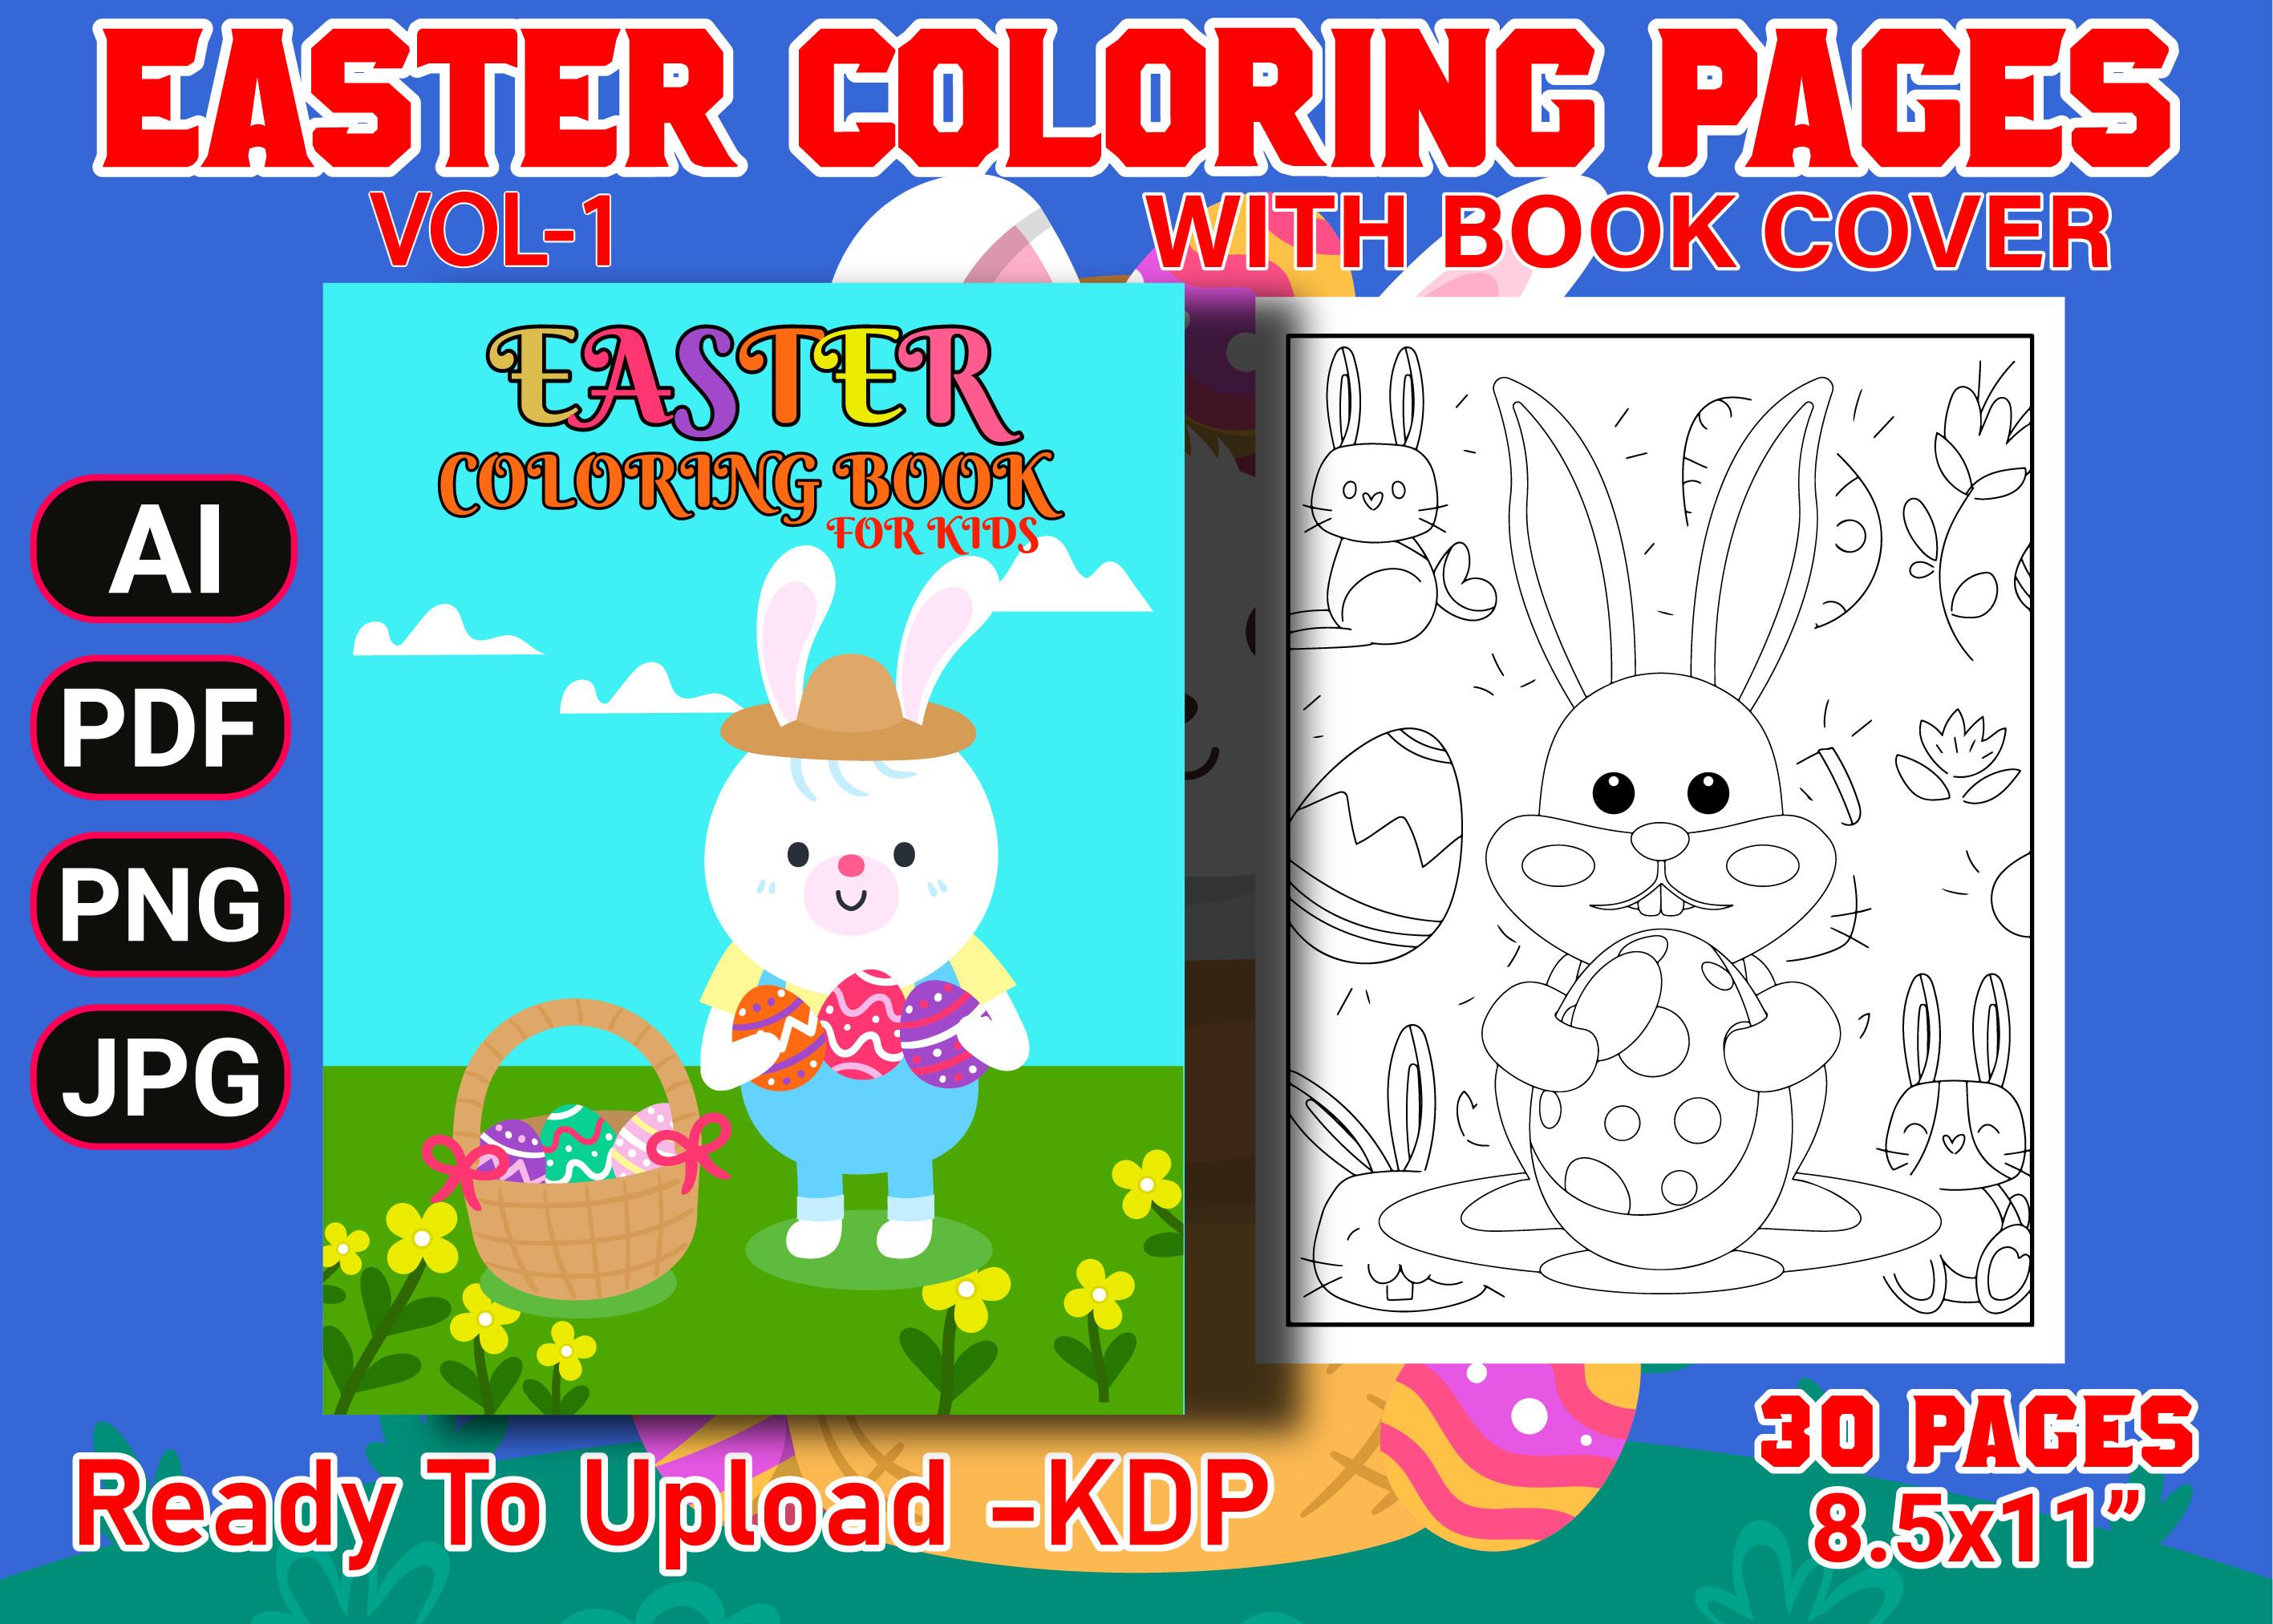 Easter Coloring Pages with Book Cover